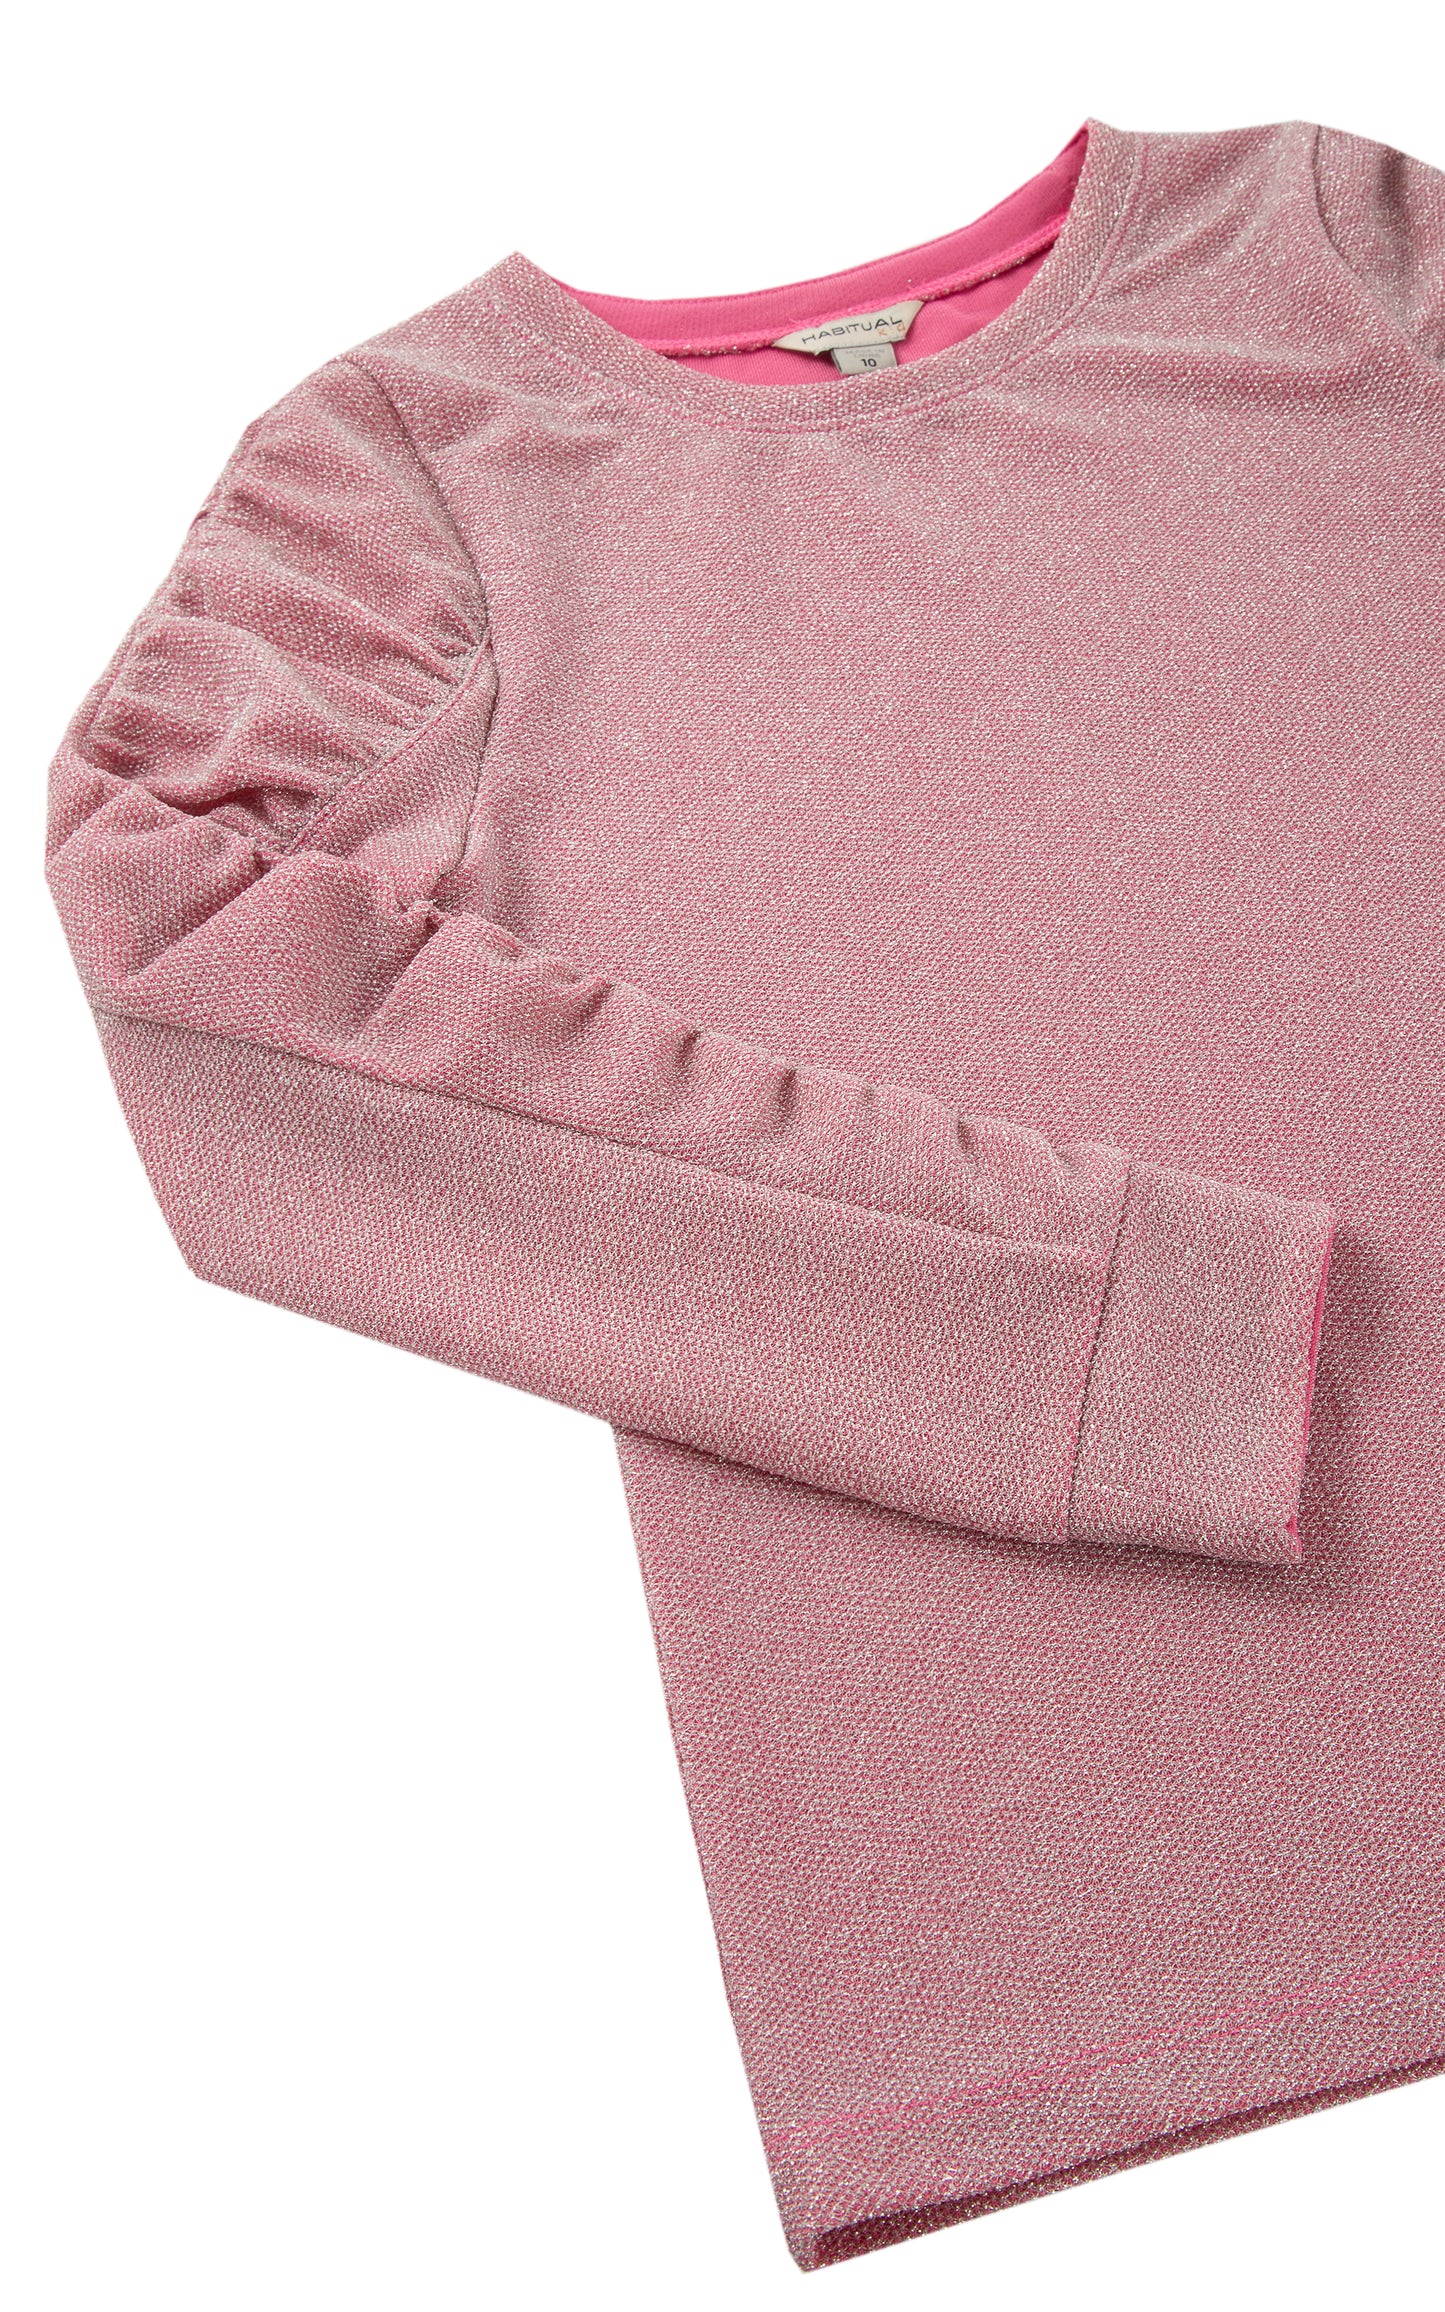 Close up of gathered, long sleeve of light pink crewneck top with metallic accents.